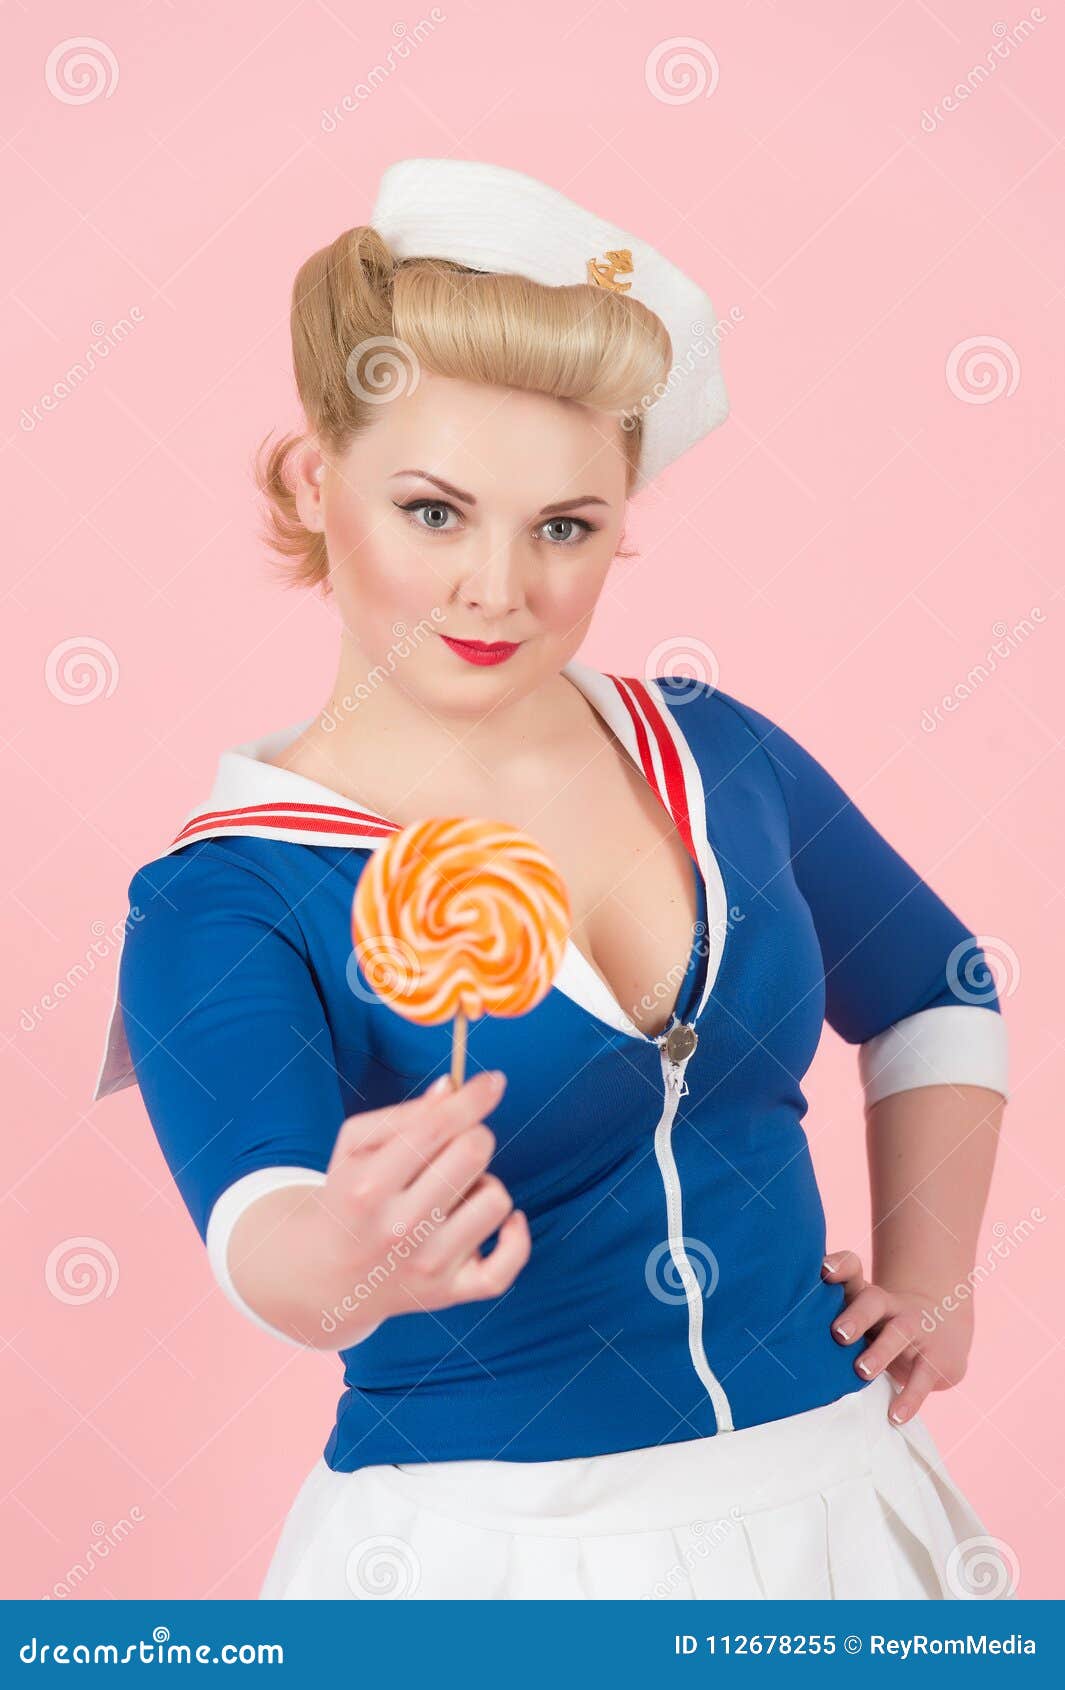 Glamour Pin Up Lady With Big Lollipop Lollipop In Hand Of Retro Styled